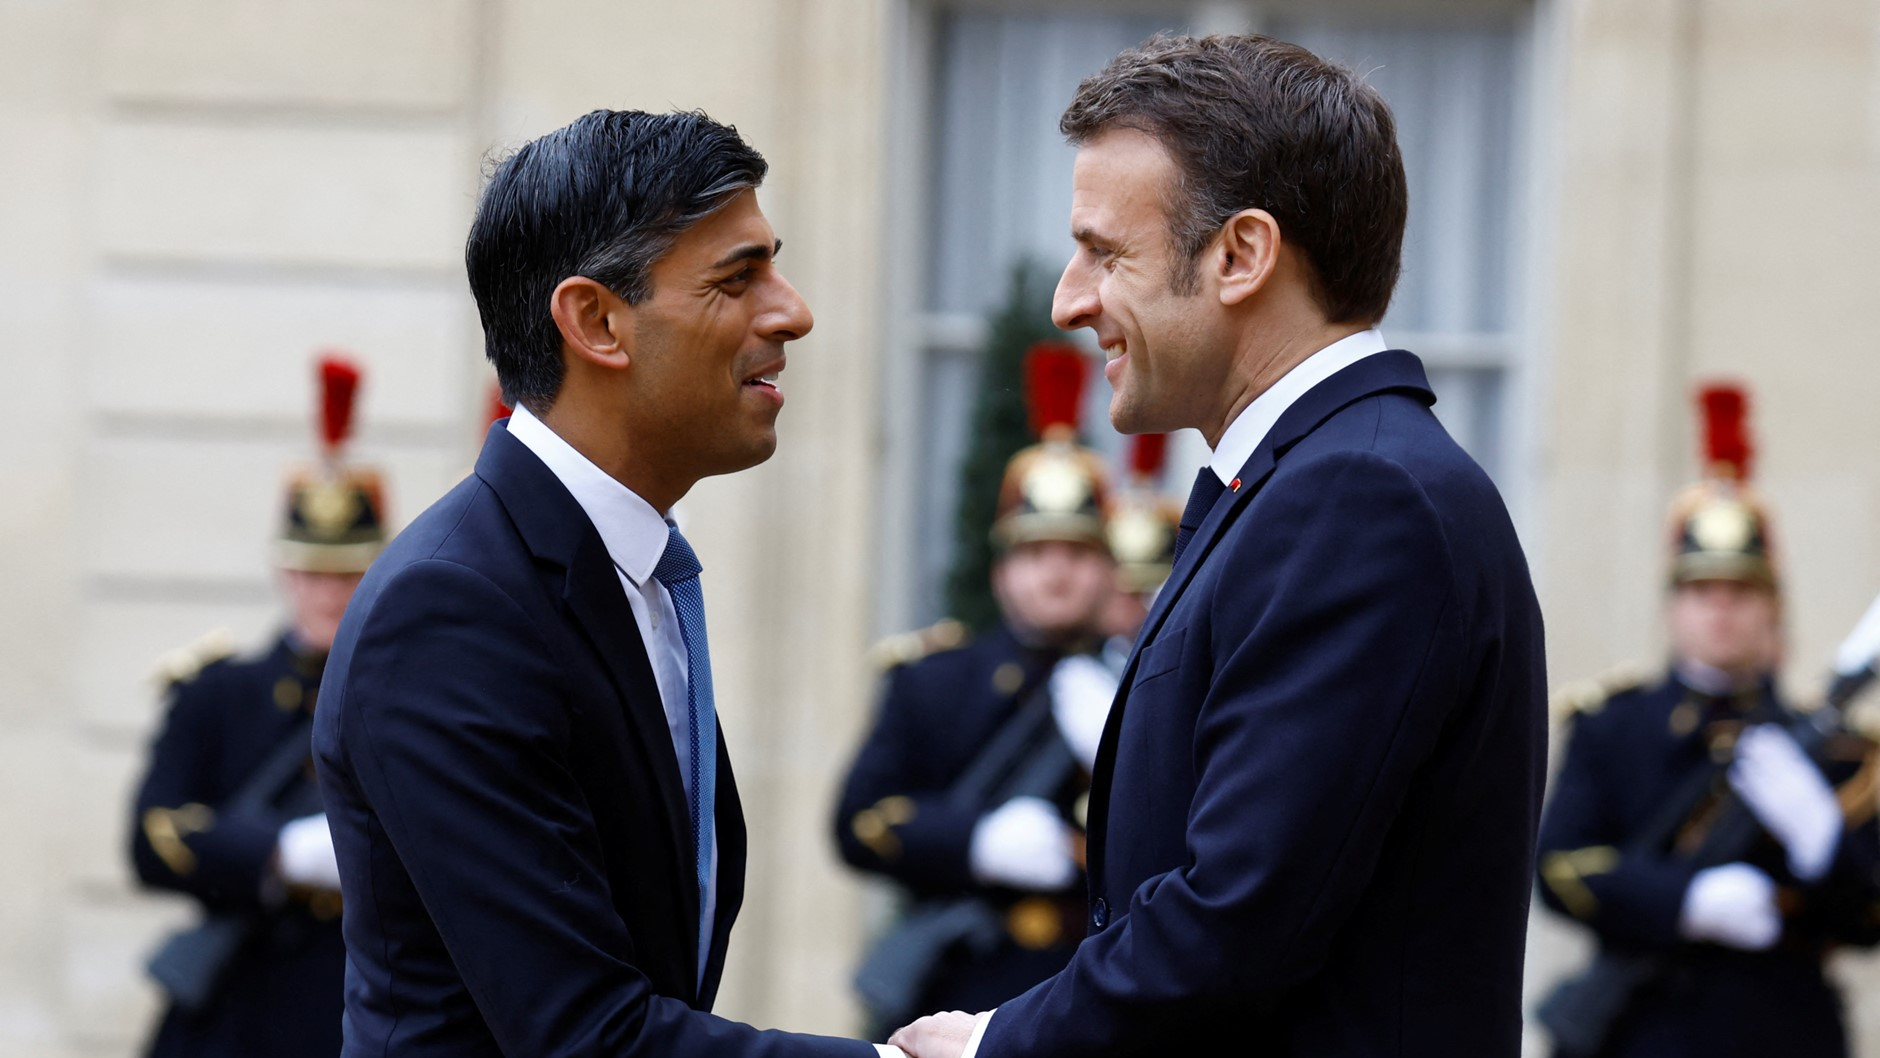 France and Britain strike migration deal.